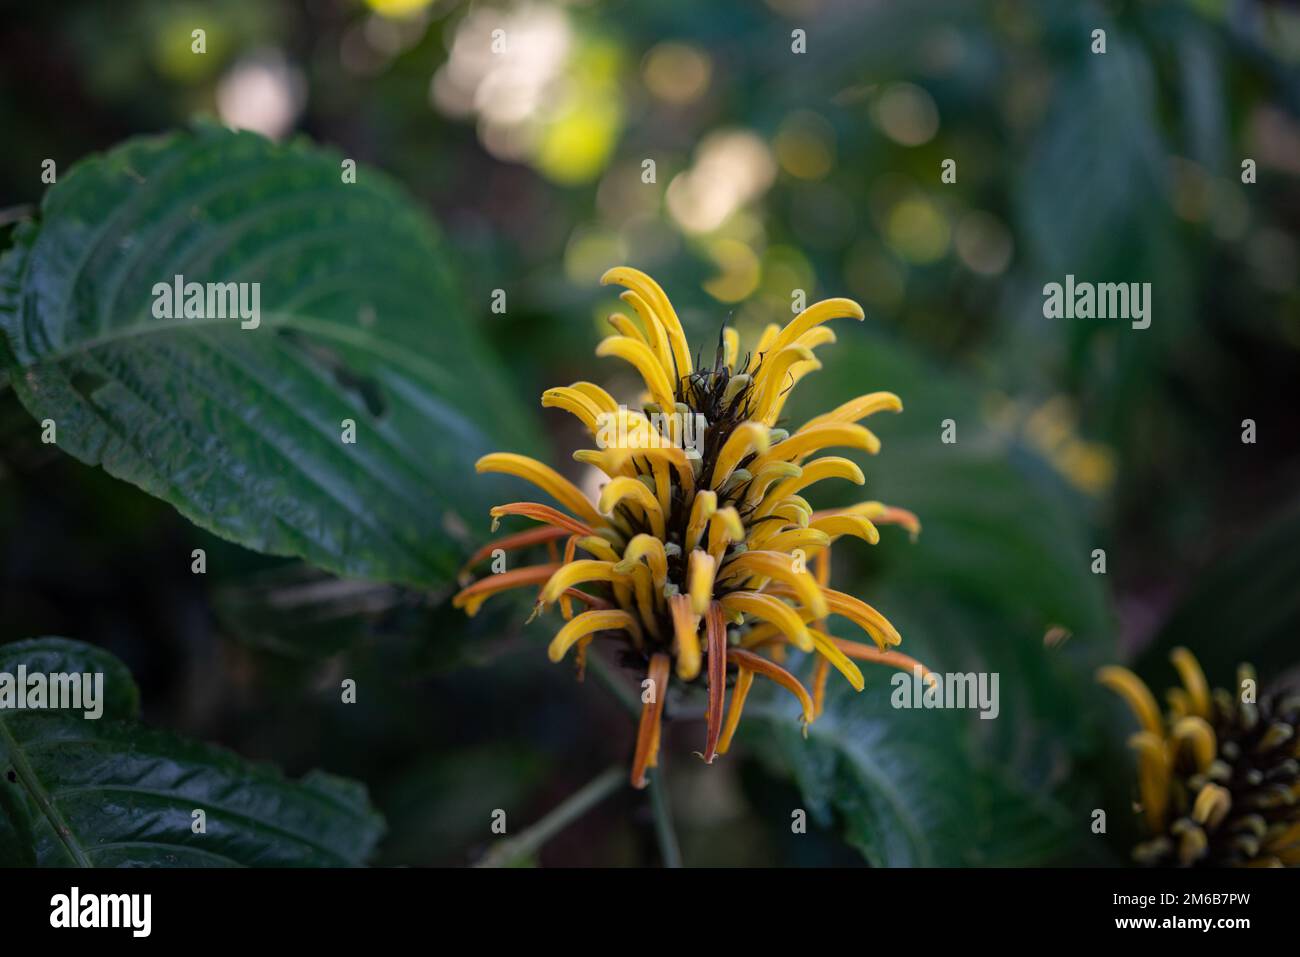 Justicia aurea yellow flower on green leaves background. Yellow or Golden Plume Stock Photo